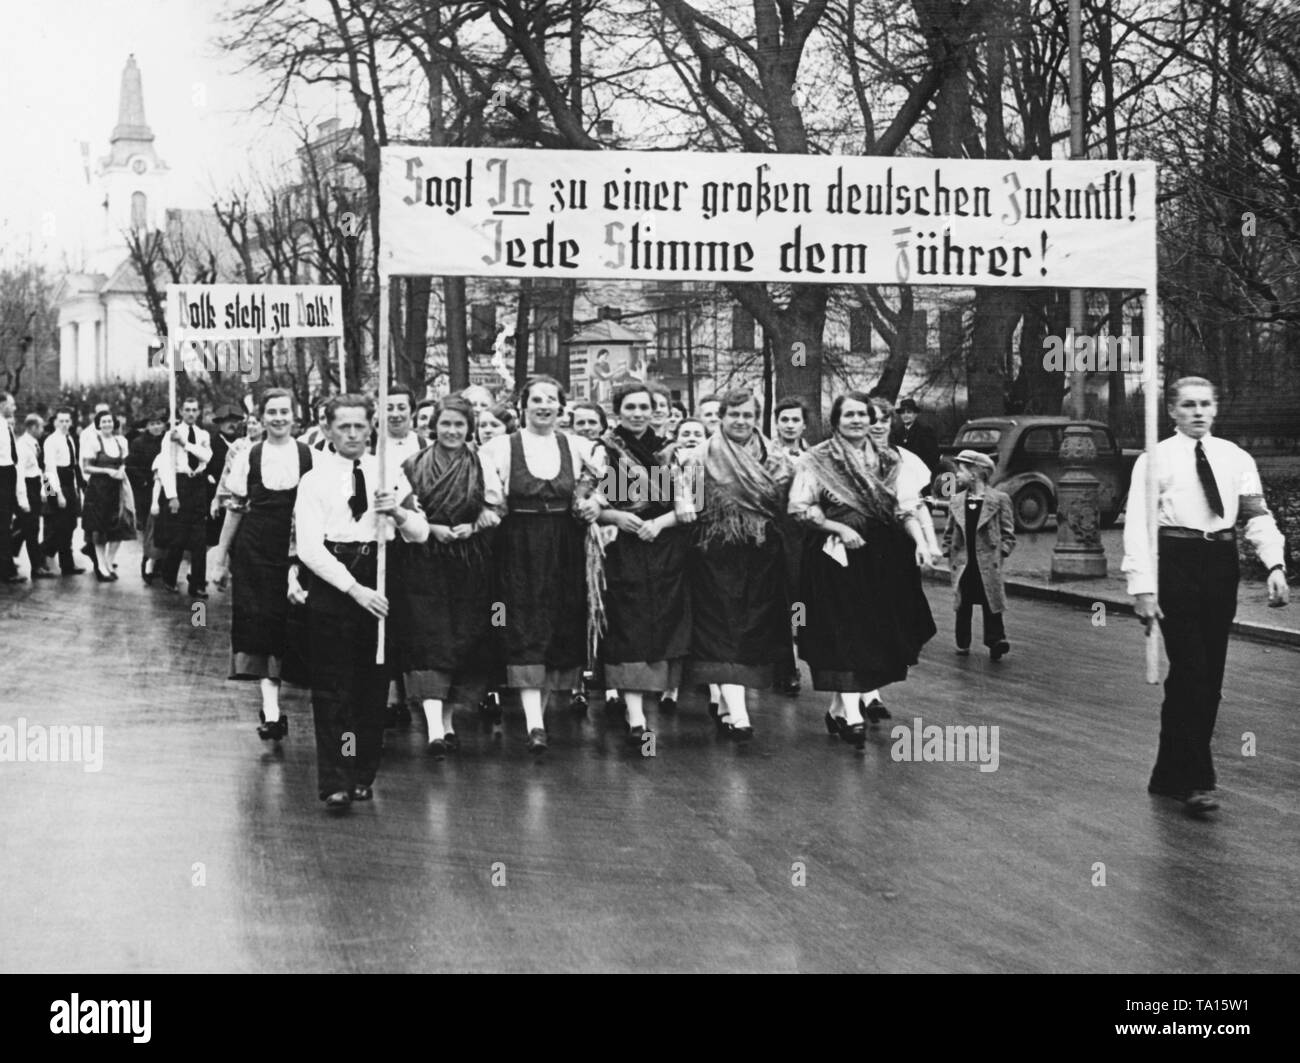 A group of Sudeten German women in traditional costumes on their way to the polling location. In the Sudeten German by-elections, votes are cast concerning the annexation of the Sudetenland to the German Reich. On the posters: 'Say Yes to a great German future! Everybody vote for the Fuehrer! ' and 'People stand by people!'. Stock Photo